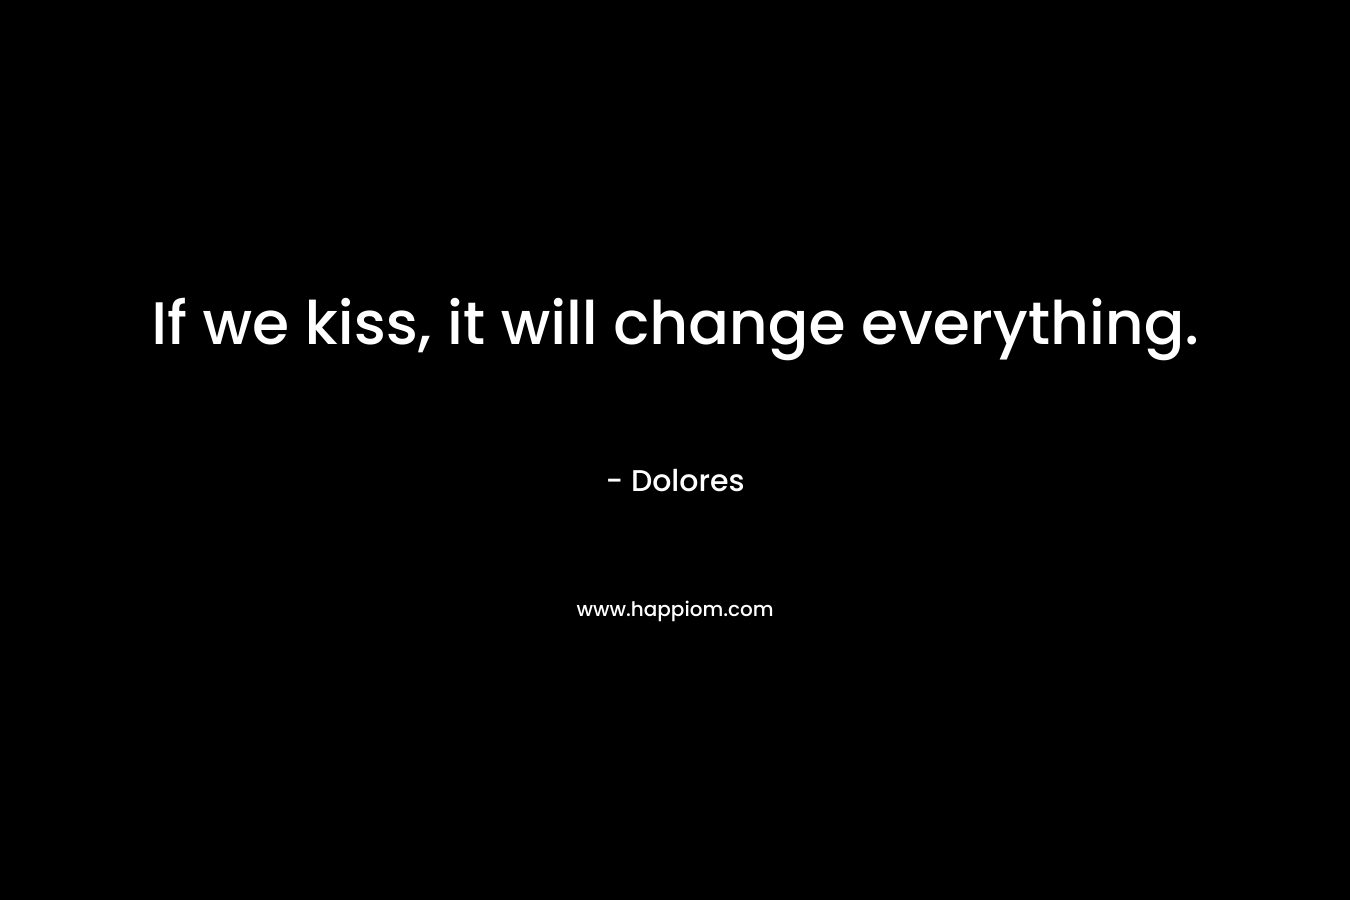 If we kiss, it will change everything. – Dolores